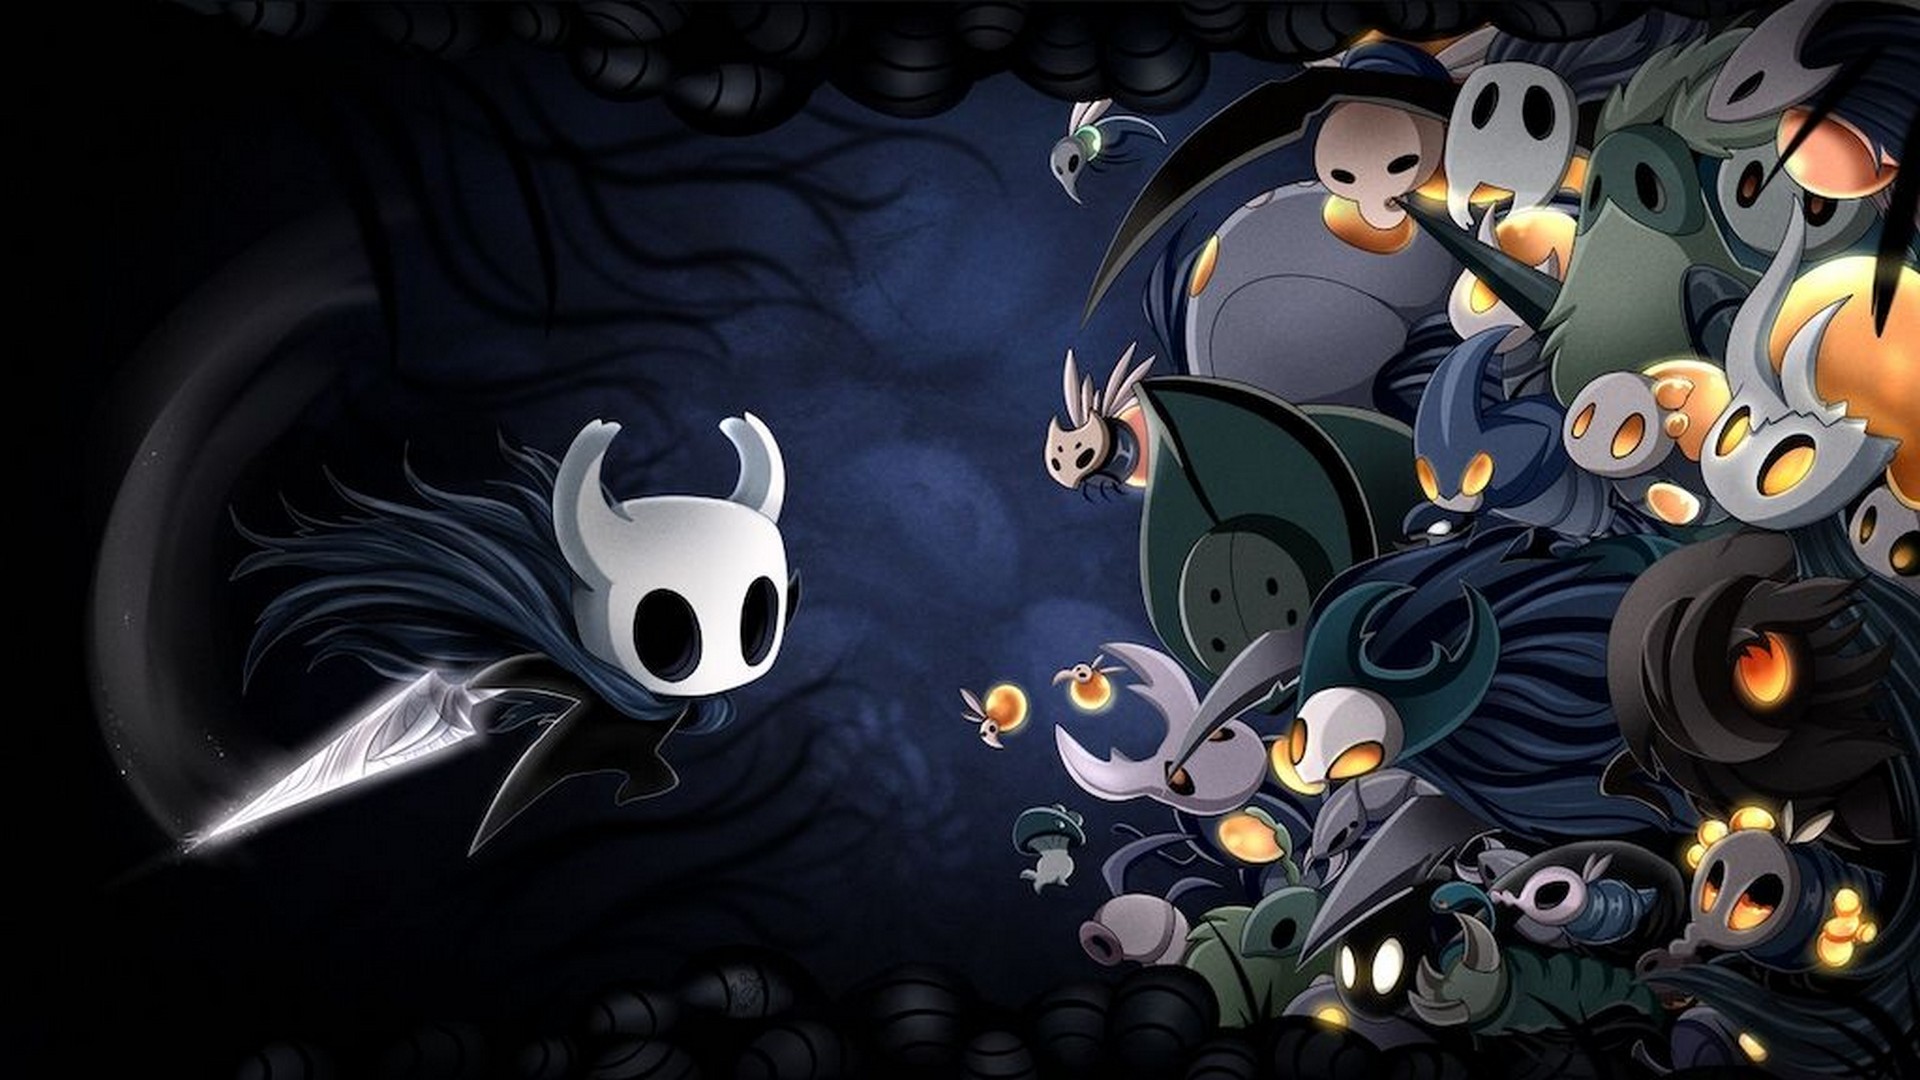 Wallpaper Hollow Knight with high-resolution 1920x1080 pixel. You can use this wallpaper for your Windows and Mac OS computers as well as your Android and iPhone smartphones